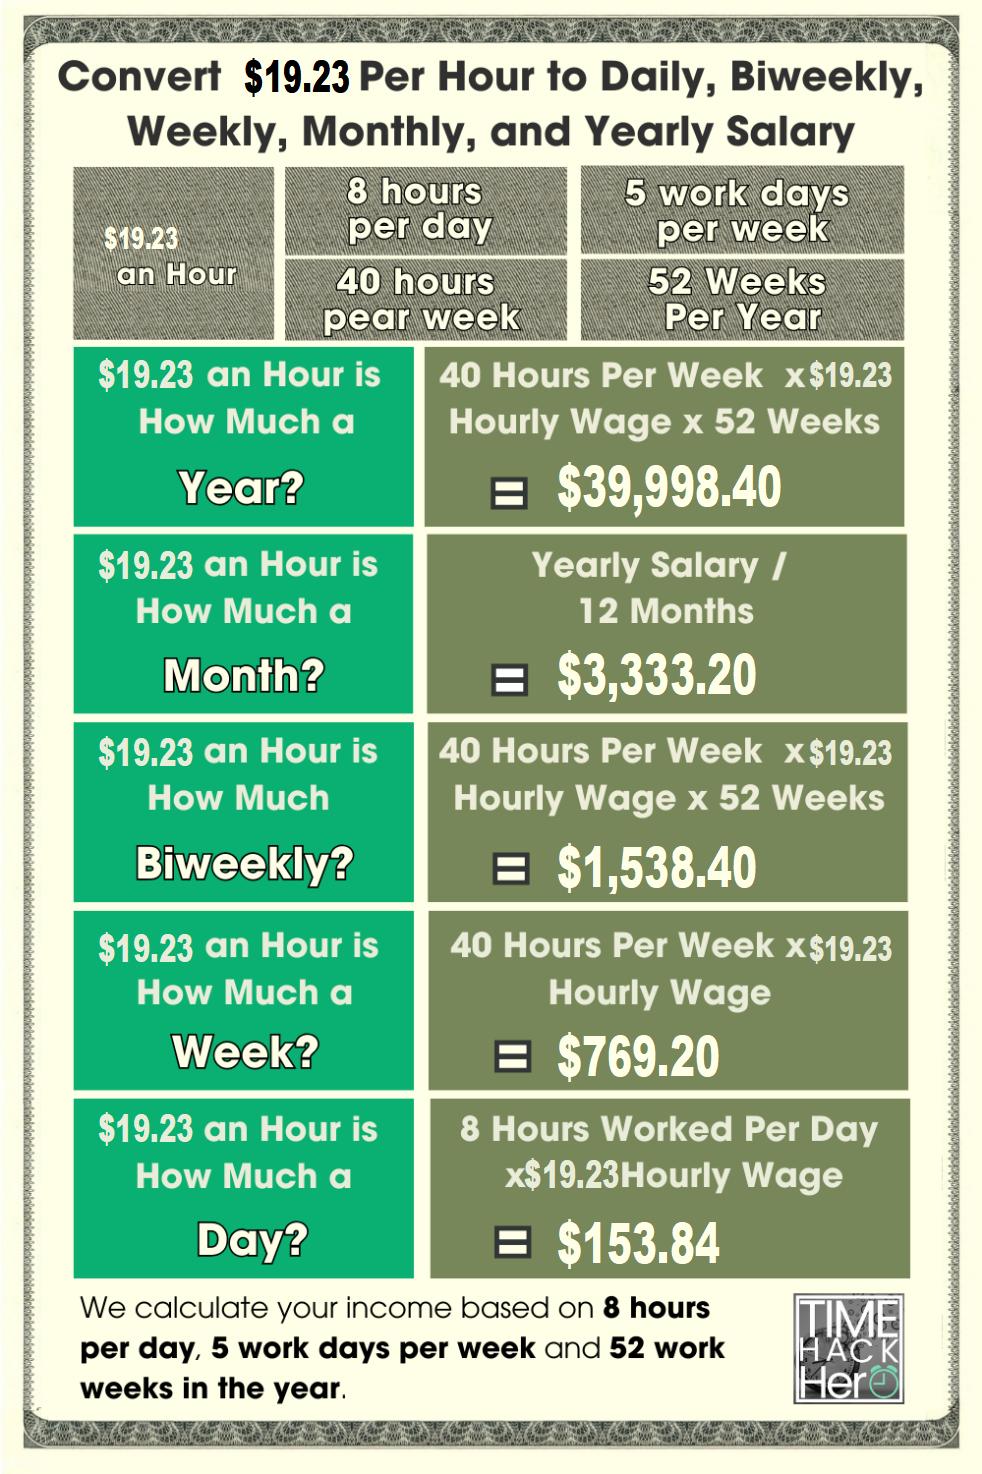 Convert $19.23 Per Hour to Weekly, Monthly, and Yearly Salary